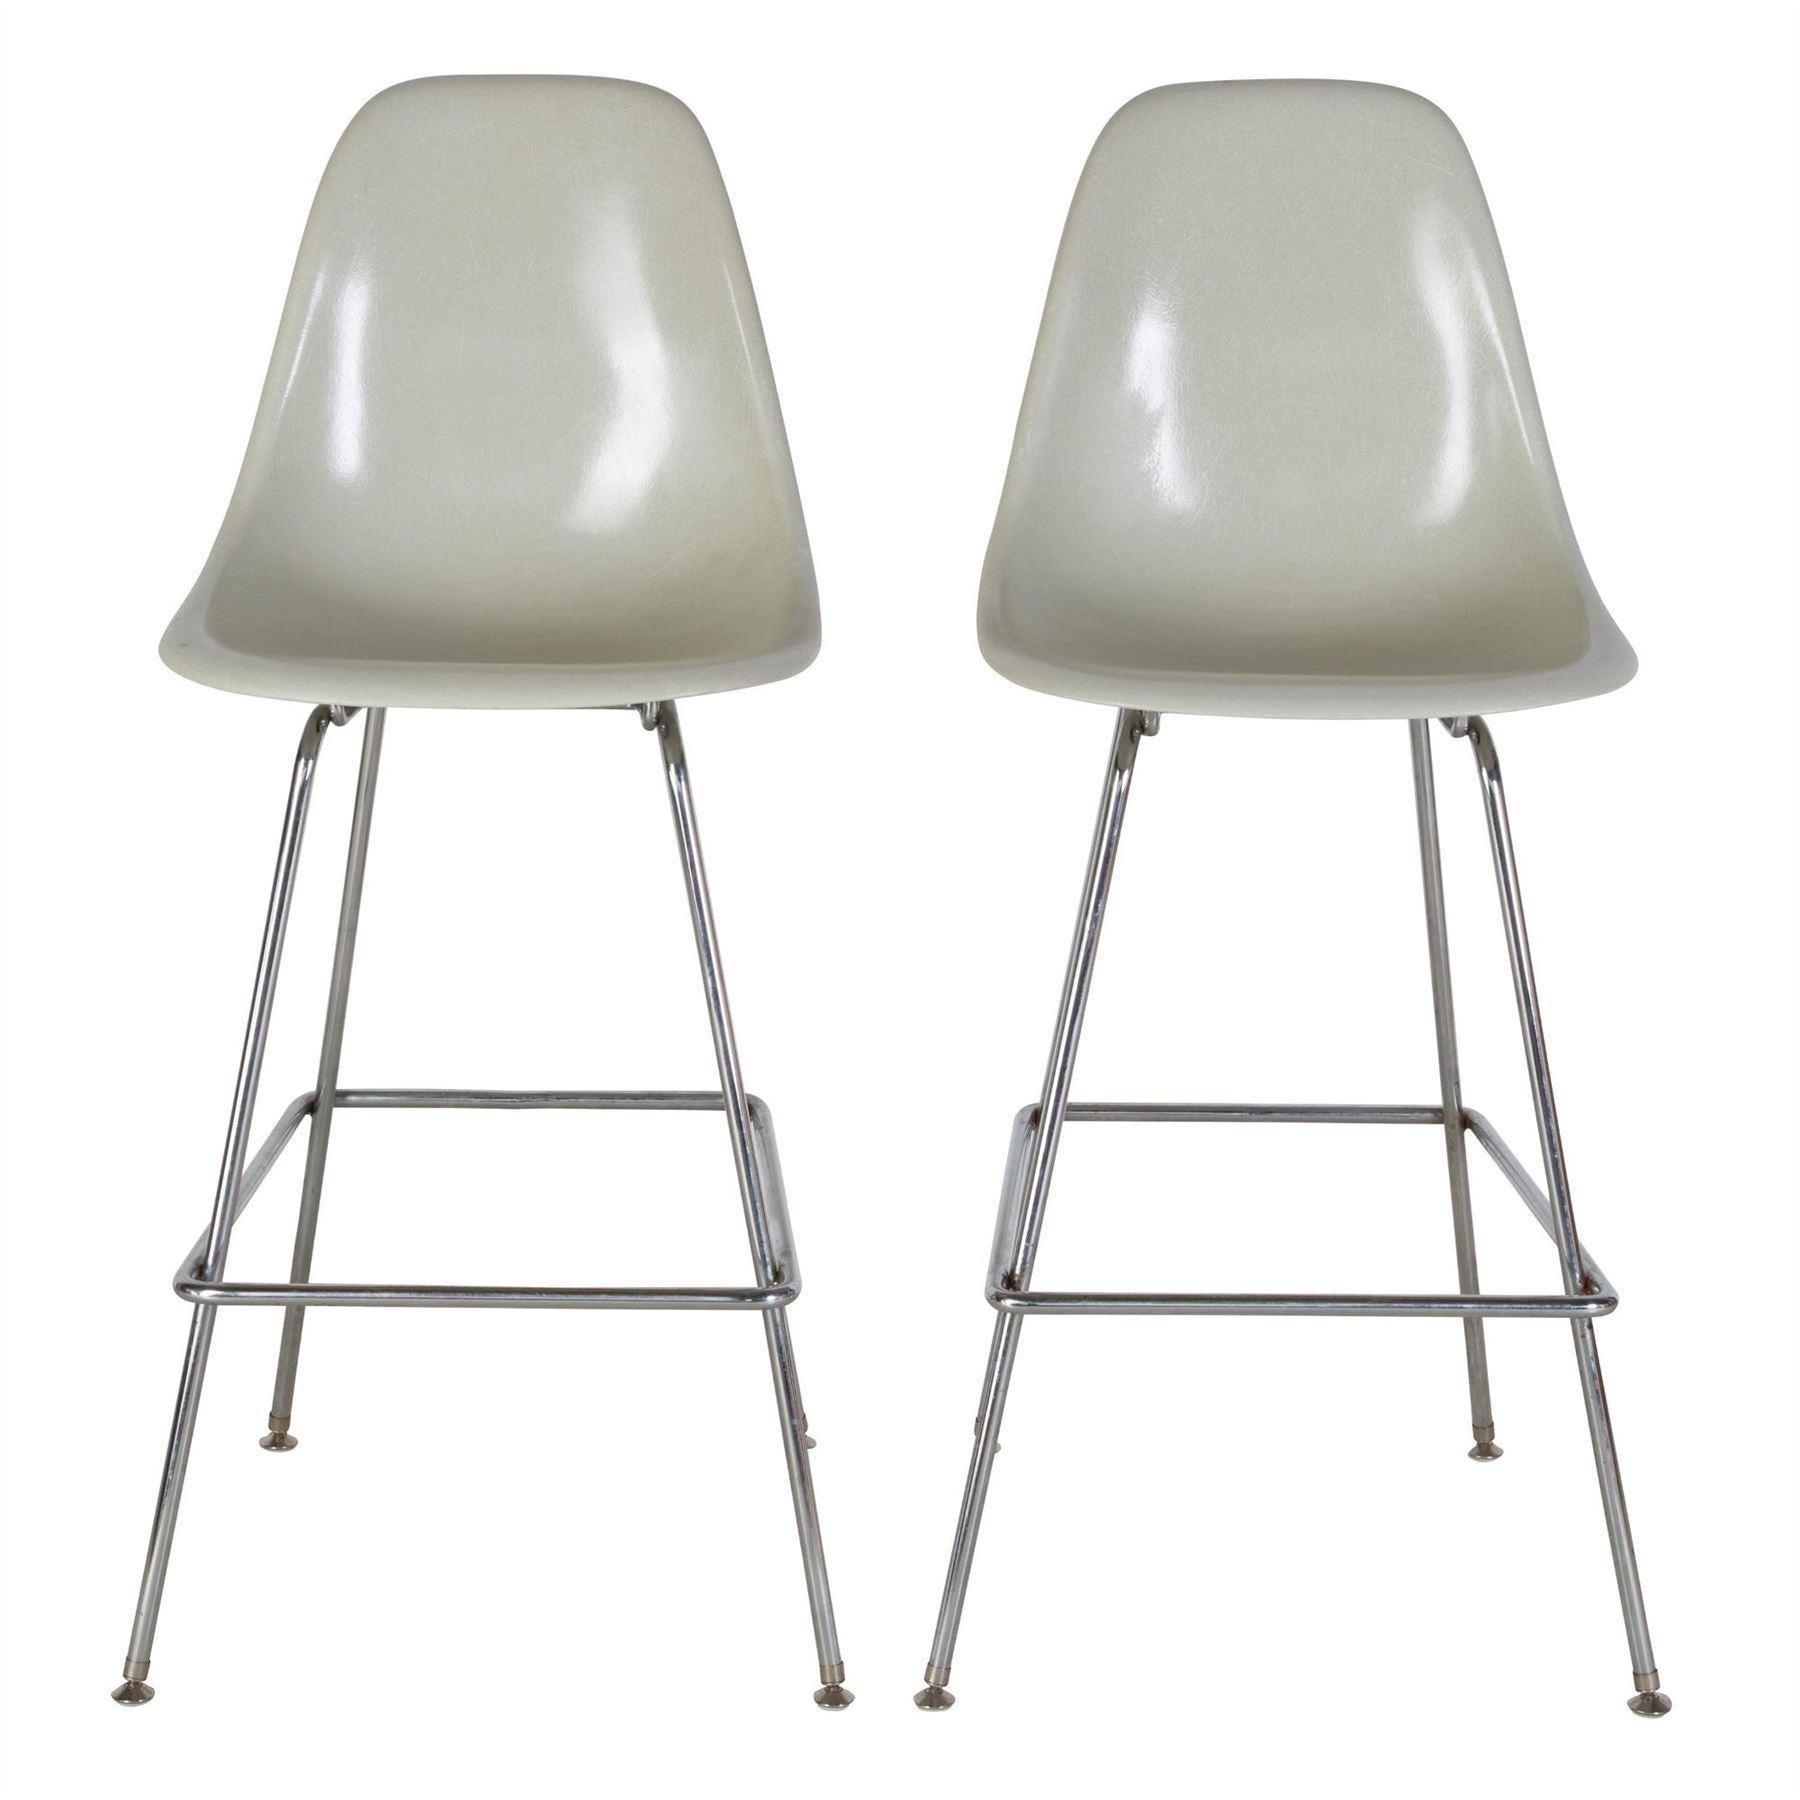 A pair of barstools manufactured by Herman Miller for Charles & Ray Eames, circa 1970.